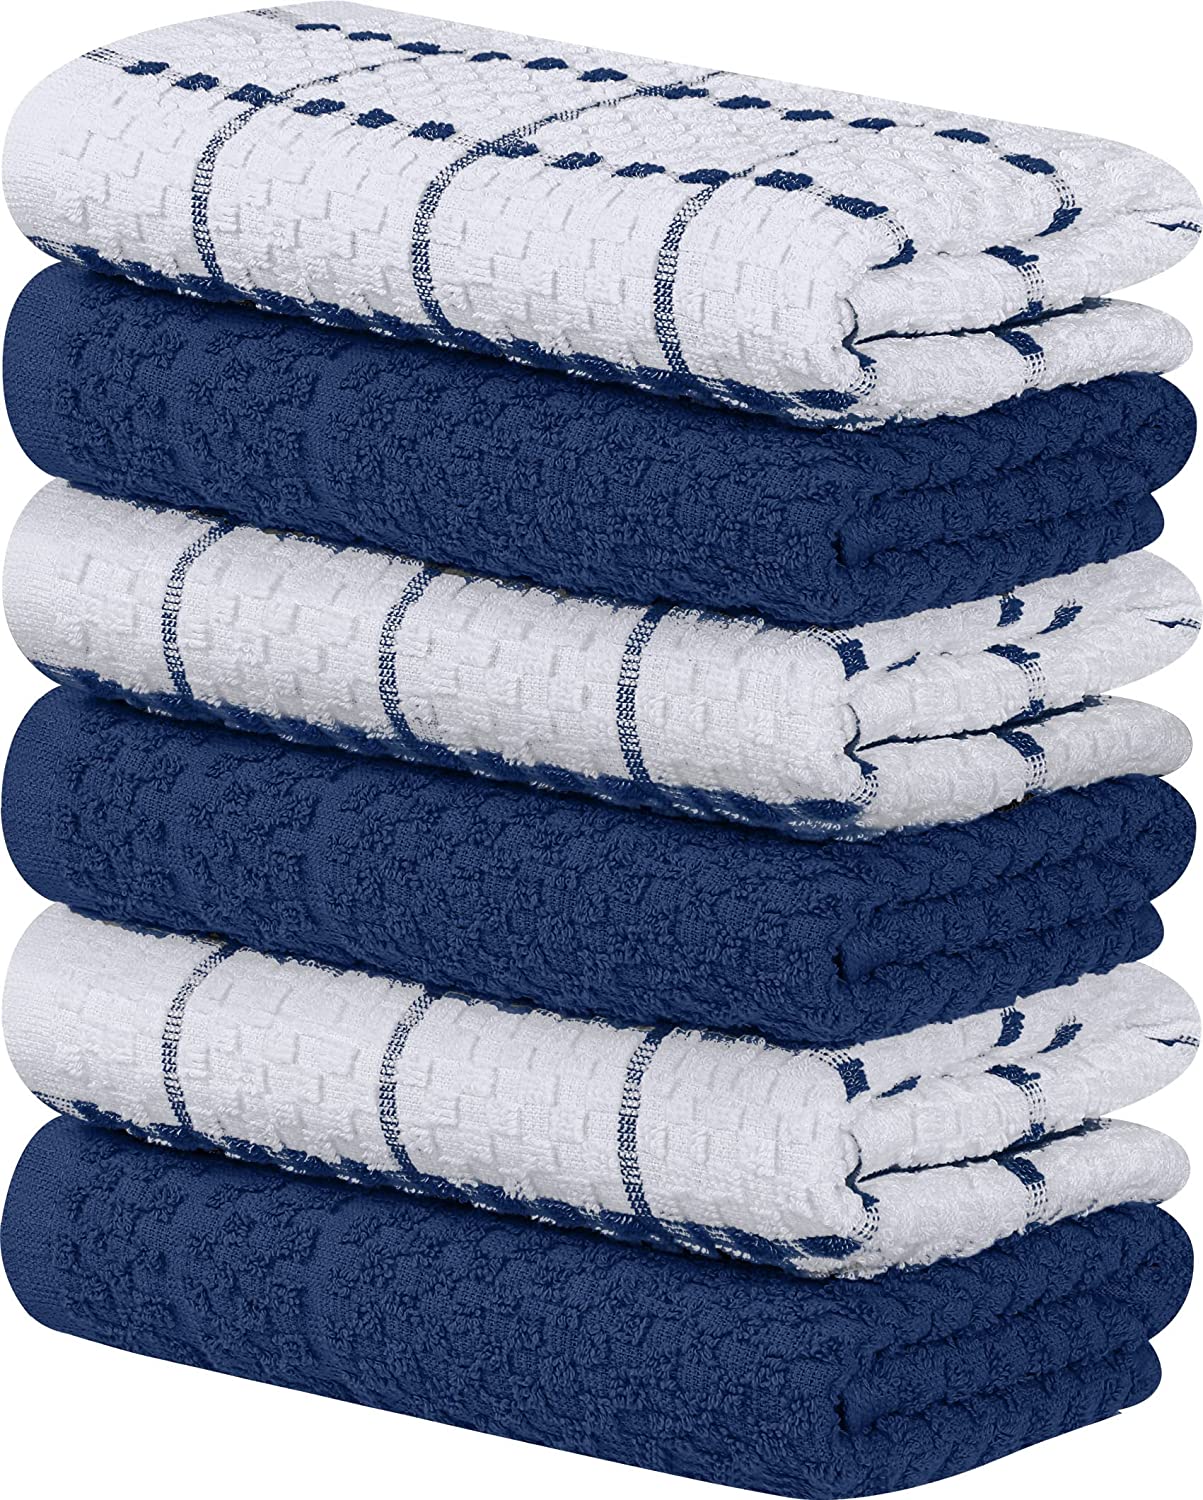 Utopia Towels Kitchen Towels [12 Pack], 15 x 25 Inches, 100% Ring Spun Cotton Su